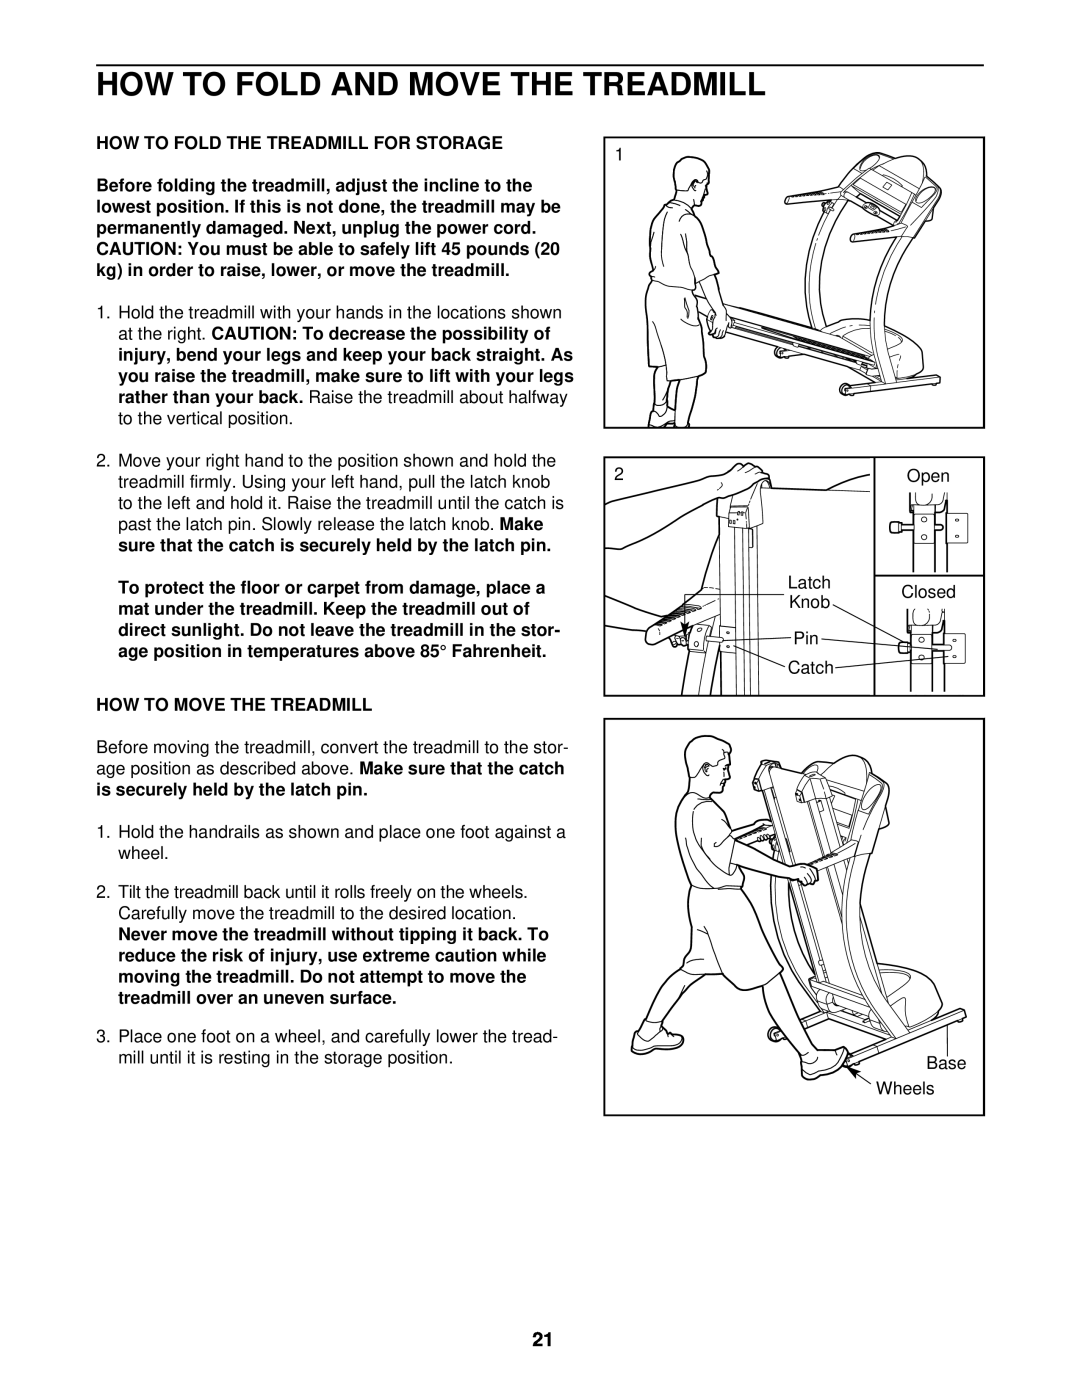 ProForm PFTL69211 How To Fold And Move The Treadmill, How To Fold The Treadmill For Storage, How To Move The Treadmill 